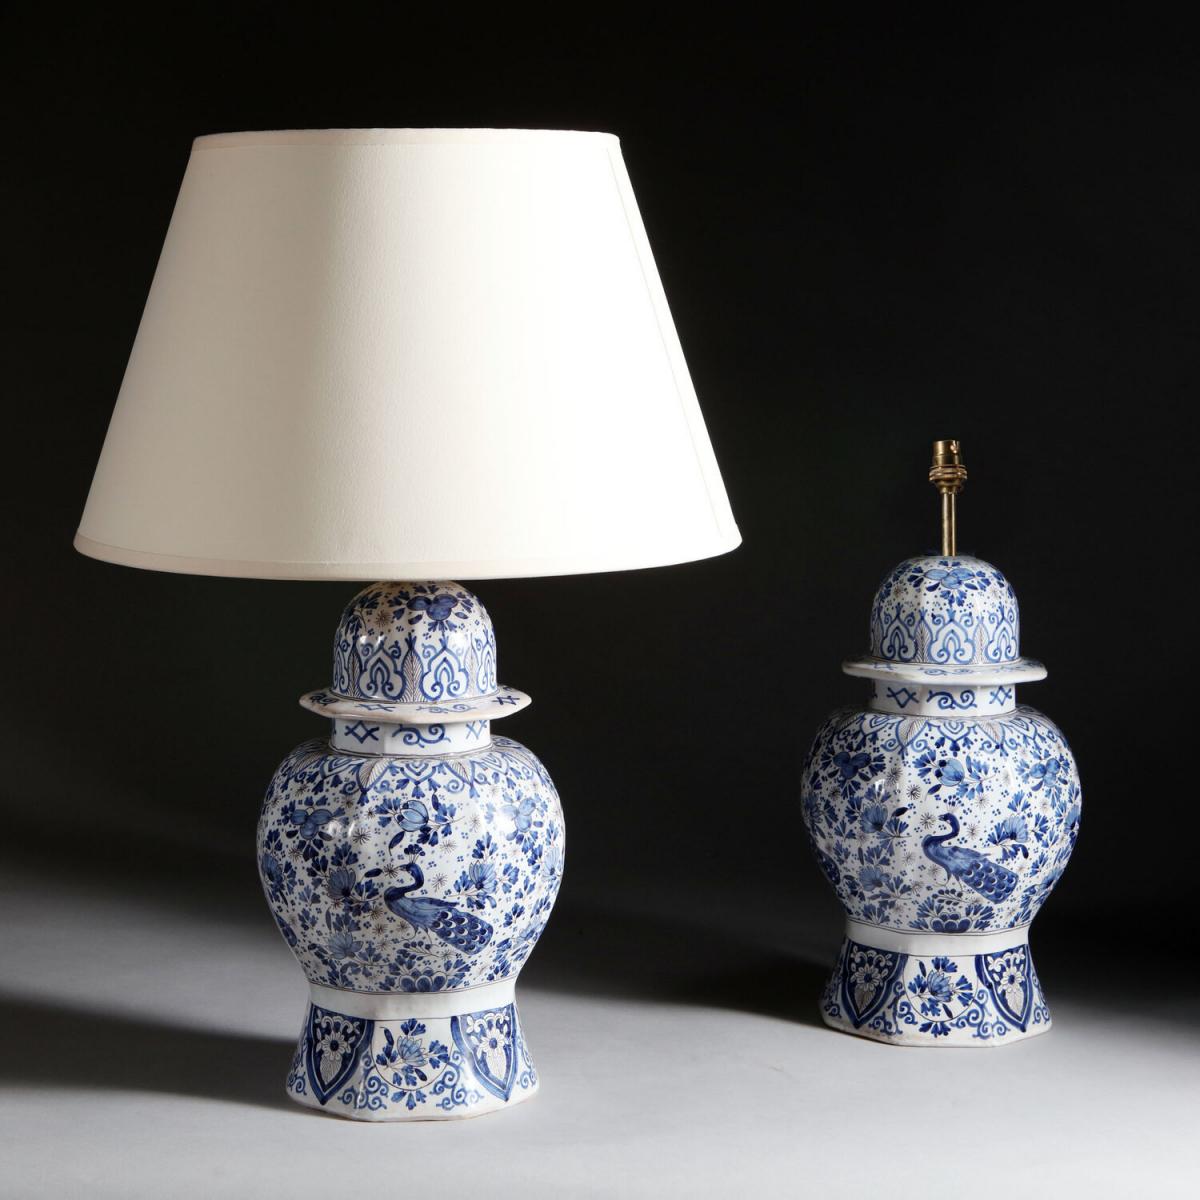 A Pair of Late 19th Century Delft Vases as Lamps